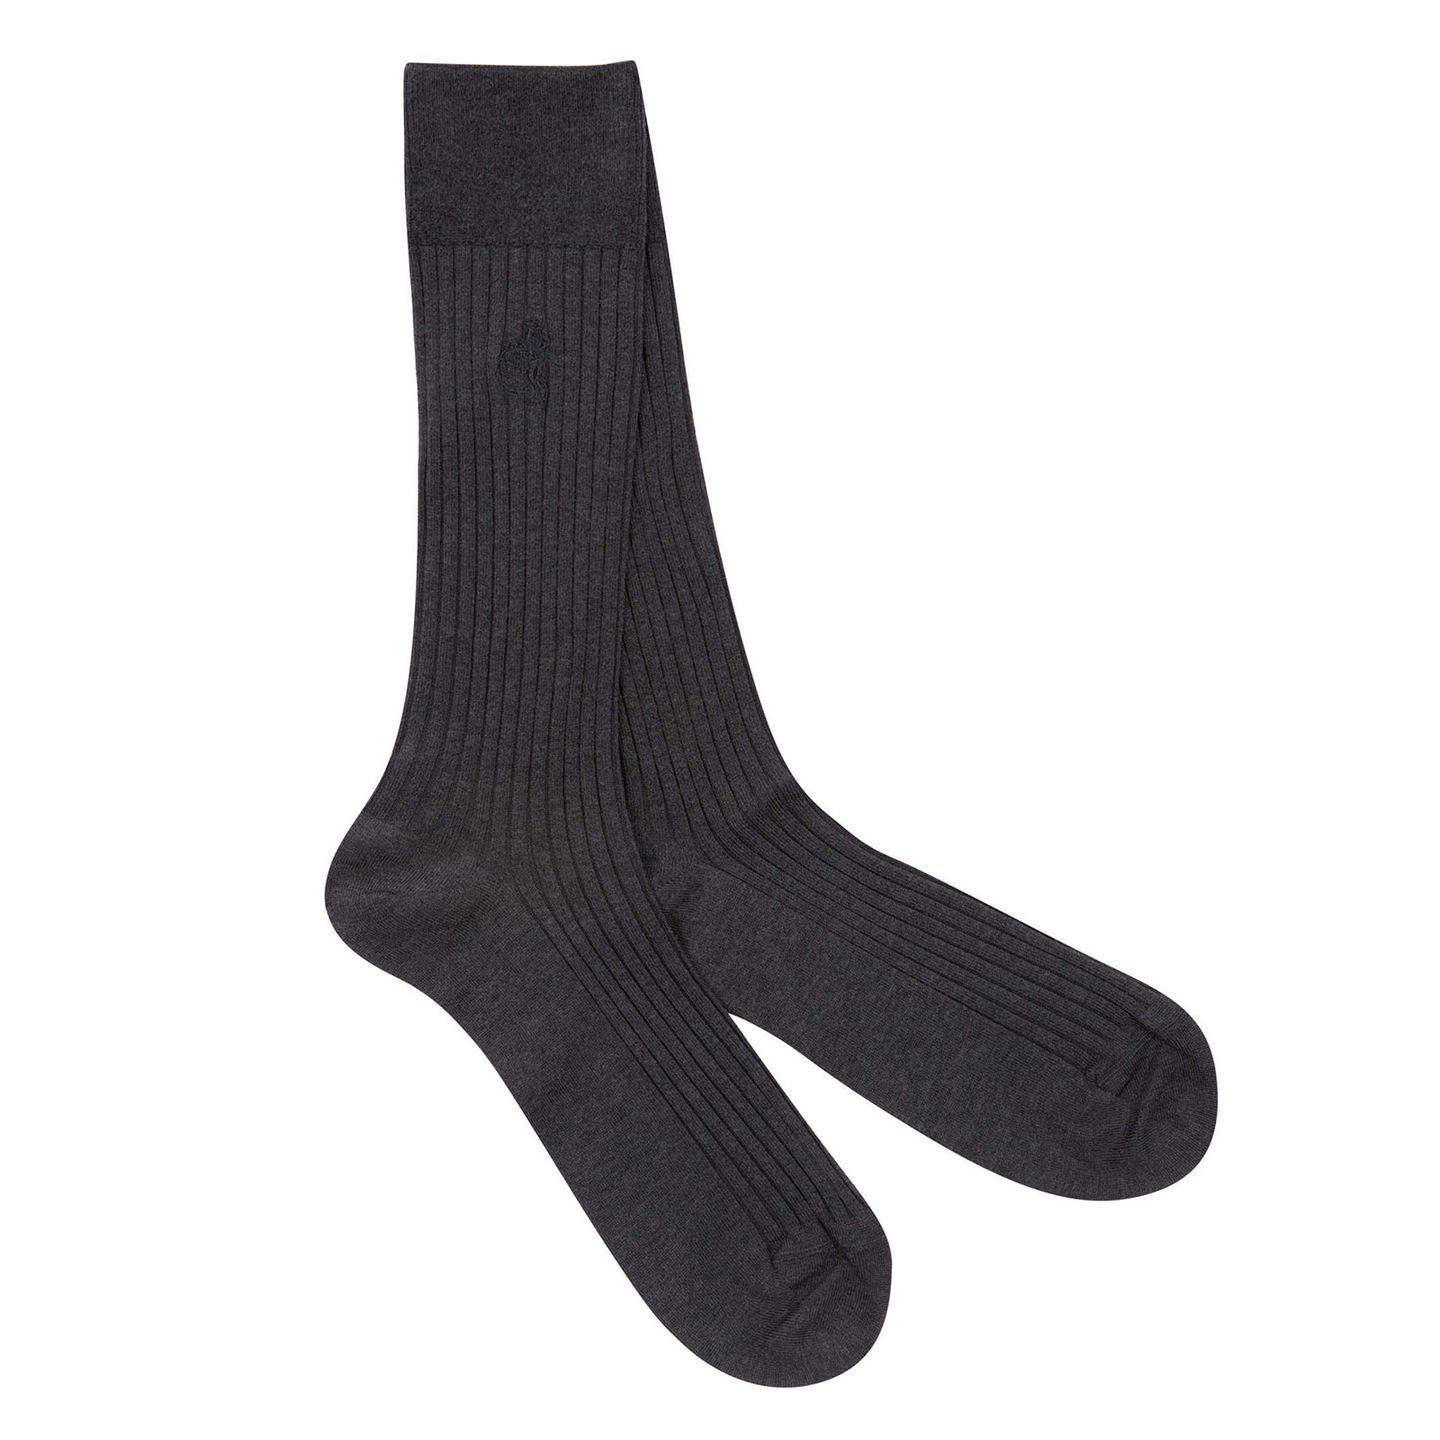 Pair of cannon ball grey sartorial socks with a black LSC logo